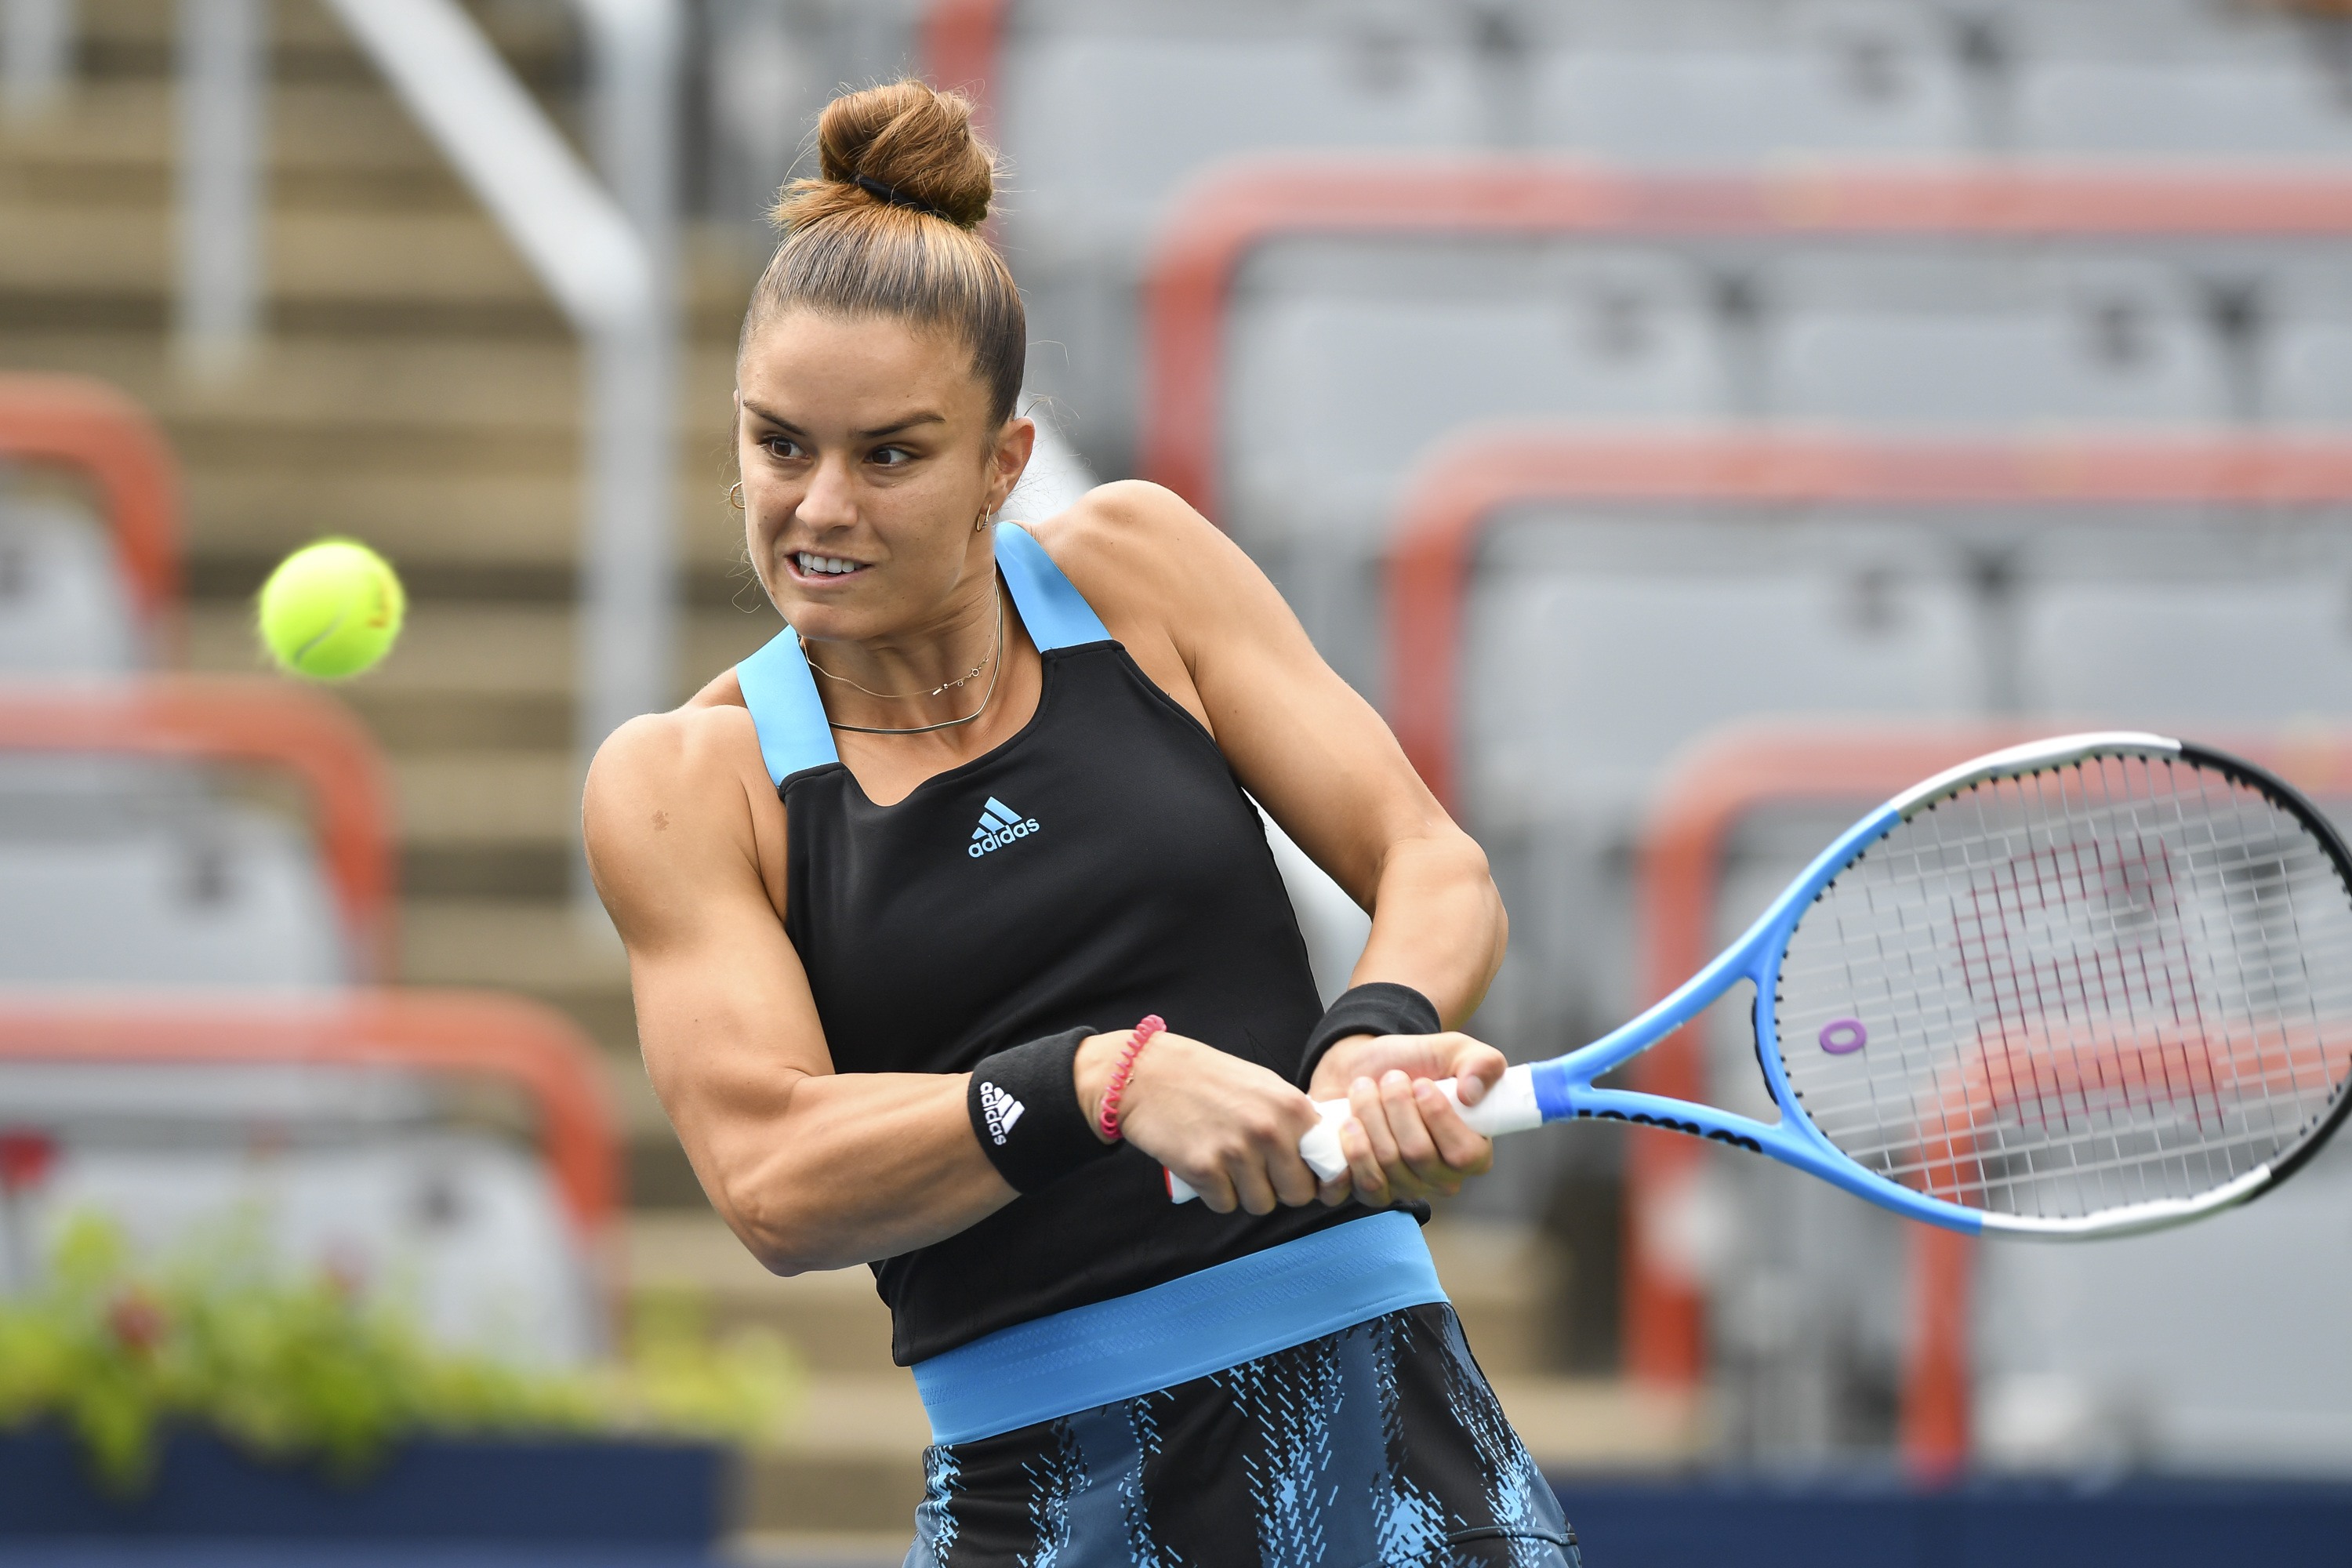 Buoyed by breakout Roland Garros and Olympic debut, Maria Sakkari aims